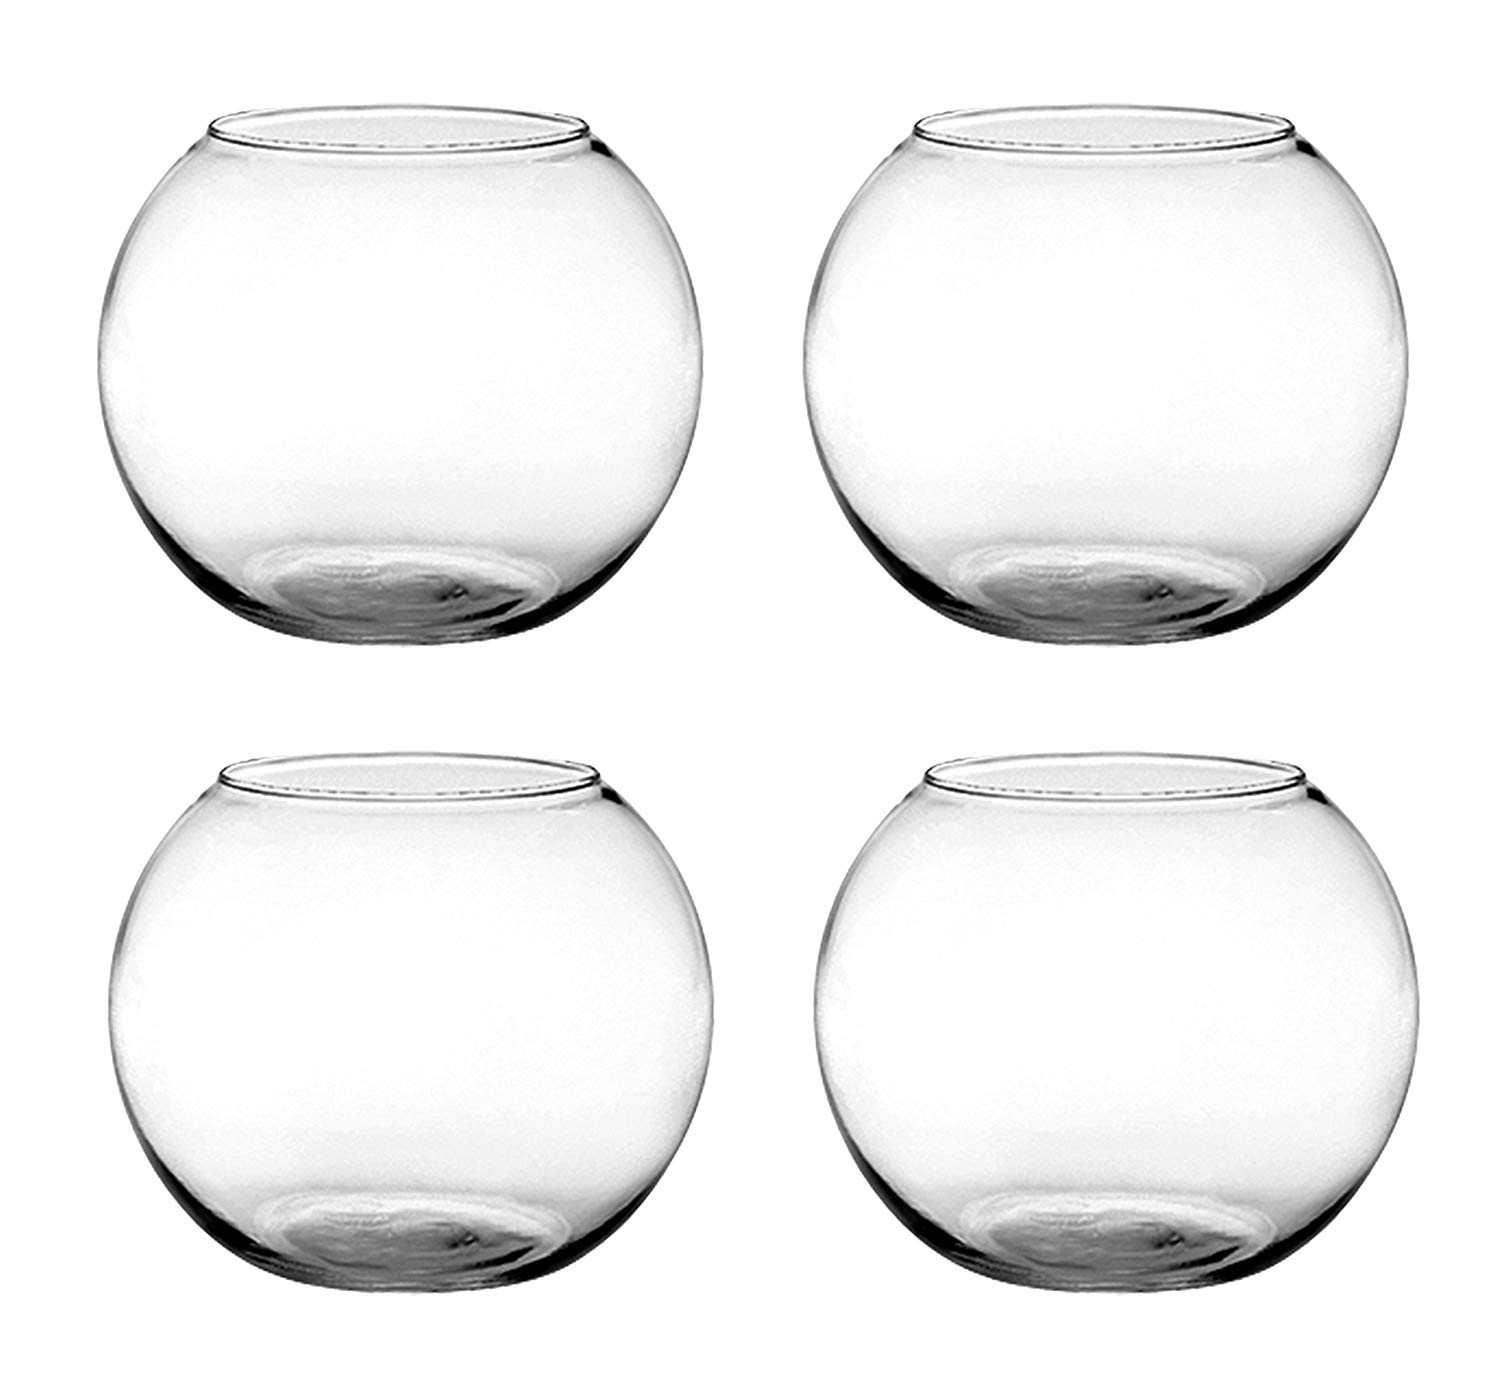 18 Fabulous Discount Glass Cylinder Vases 2024 free download discount glass cylinder vases of amazon com set of 4 syndicate sales 6 inches clear rose bowl with amazon com set of 4 syndicate sales 6 inches clear rose bowl bundled by maven gifts garden 